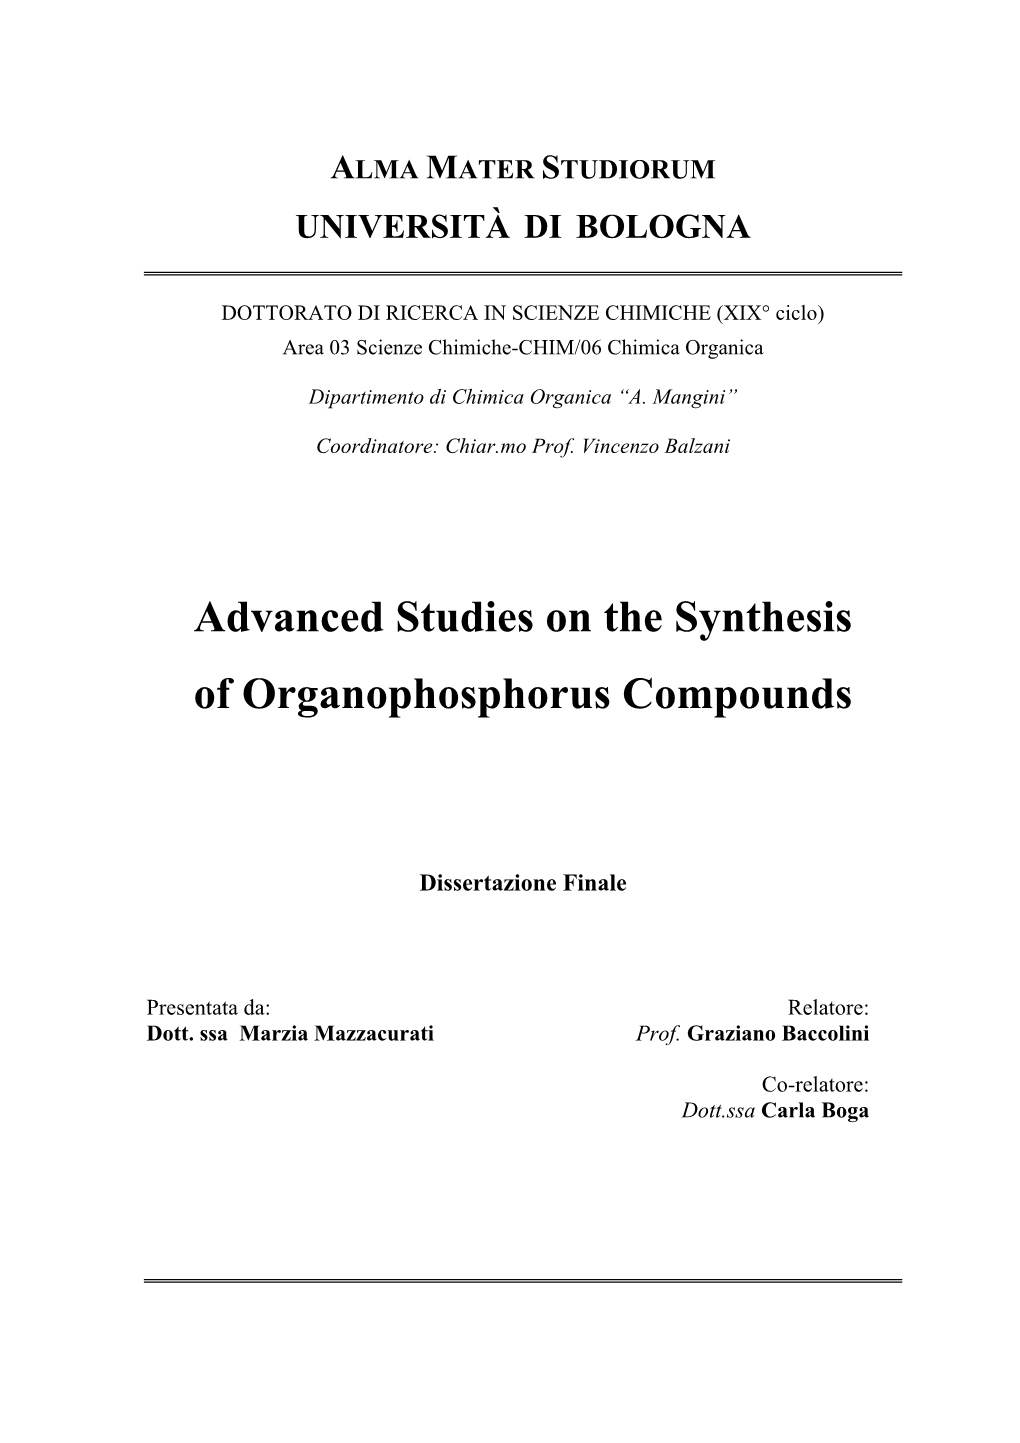 Advanced Studies on the Synthesis of Organophosphorus Compounds